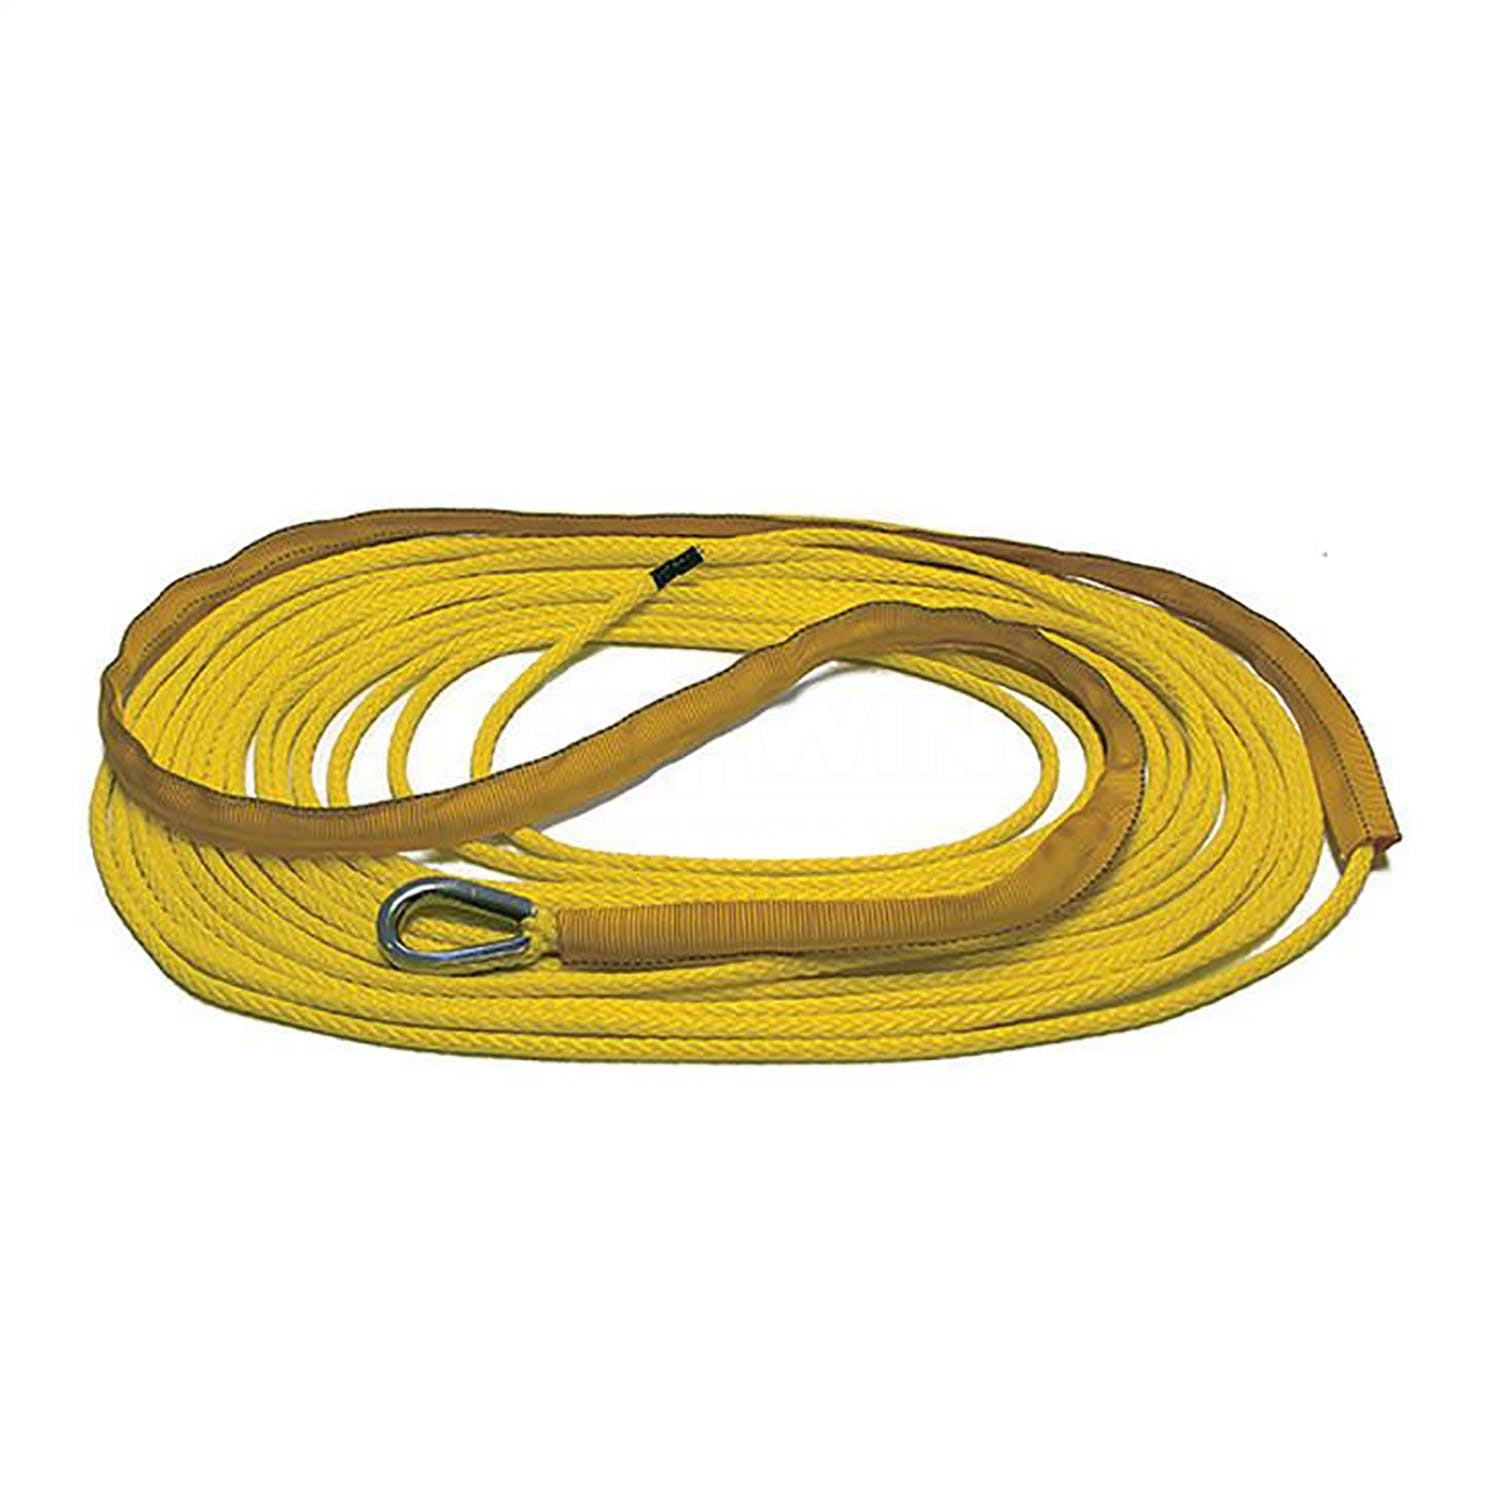 Superwinch 87-42613 Replacement Synthetic Rope 3/16 diameter x 50 length for Terra 25/35SR